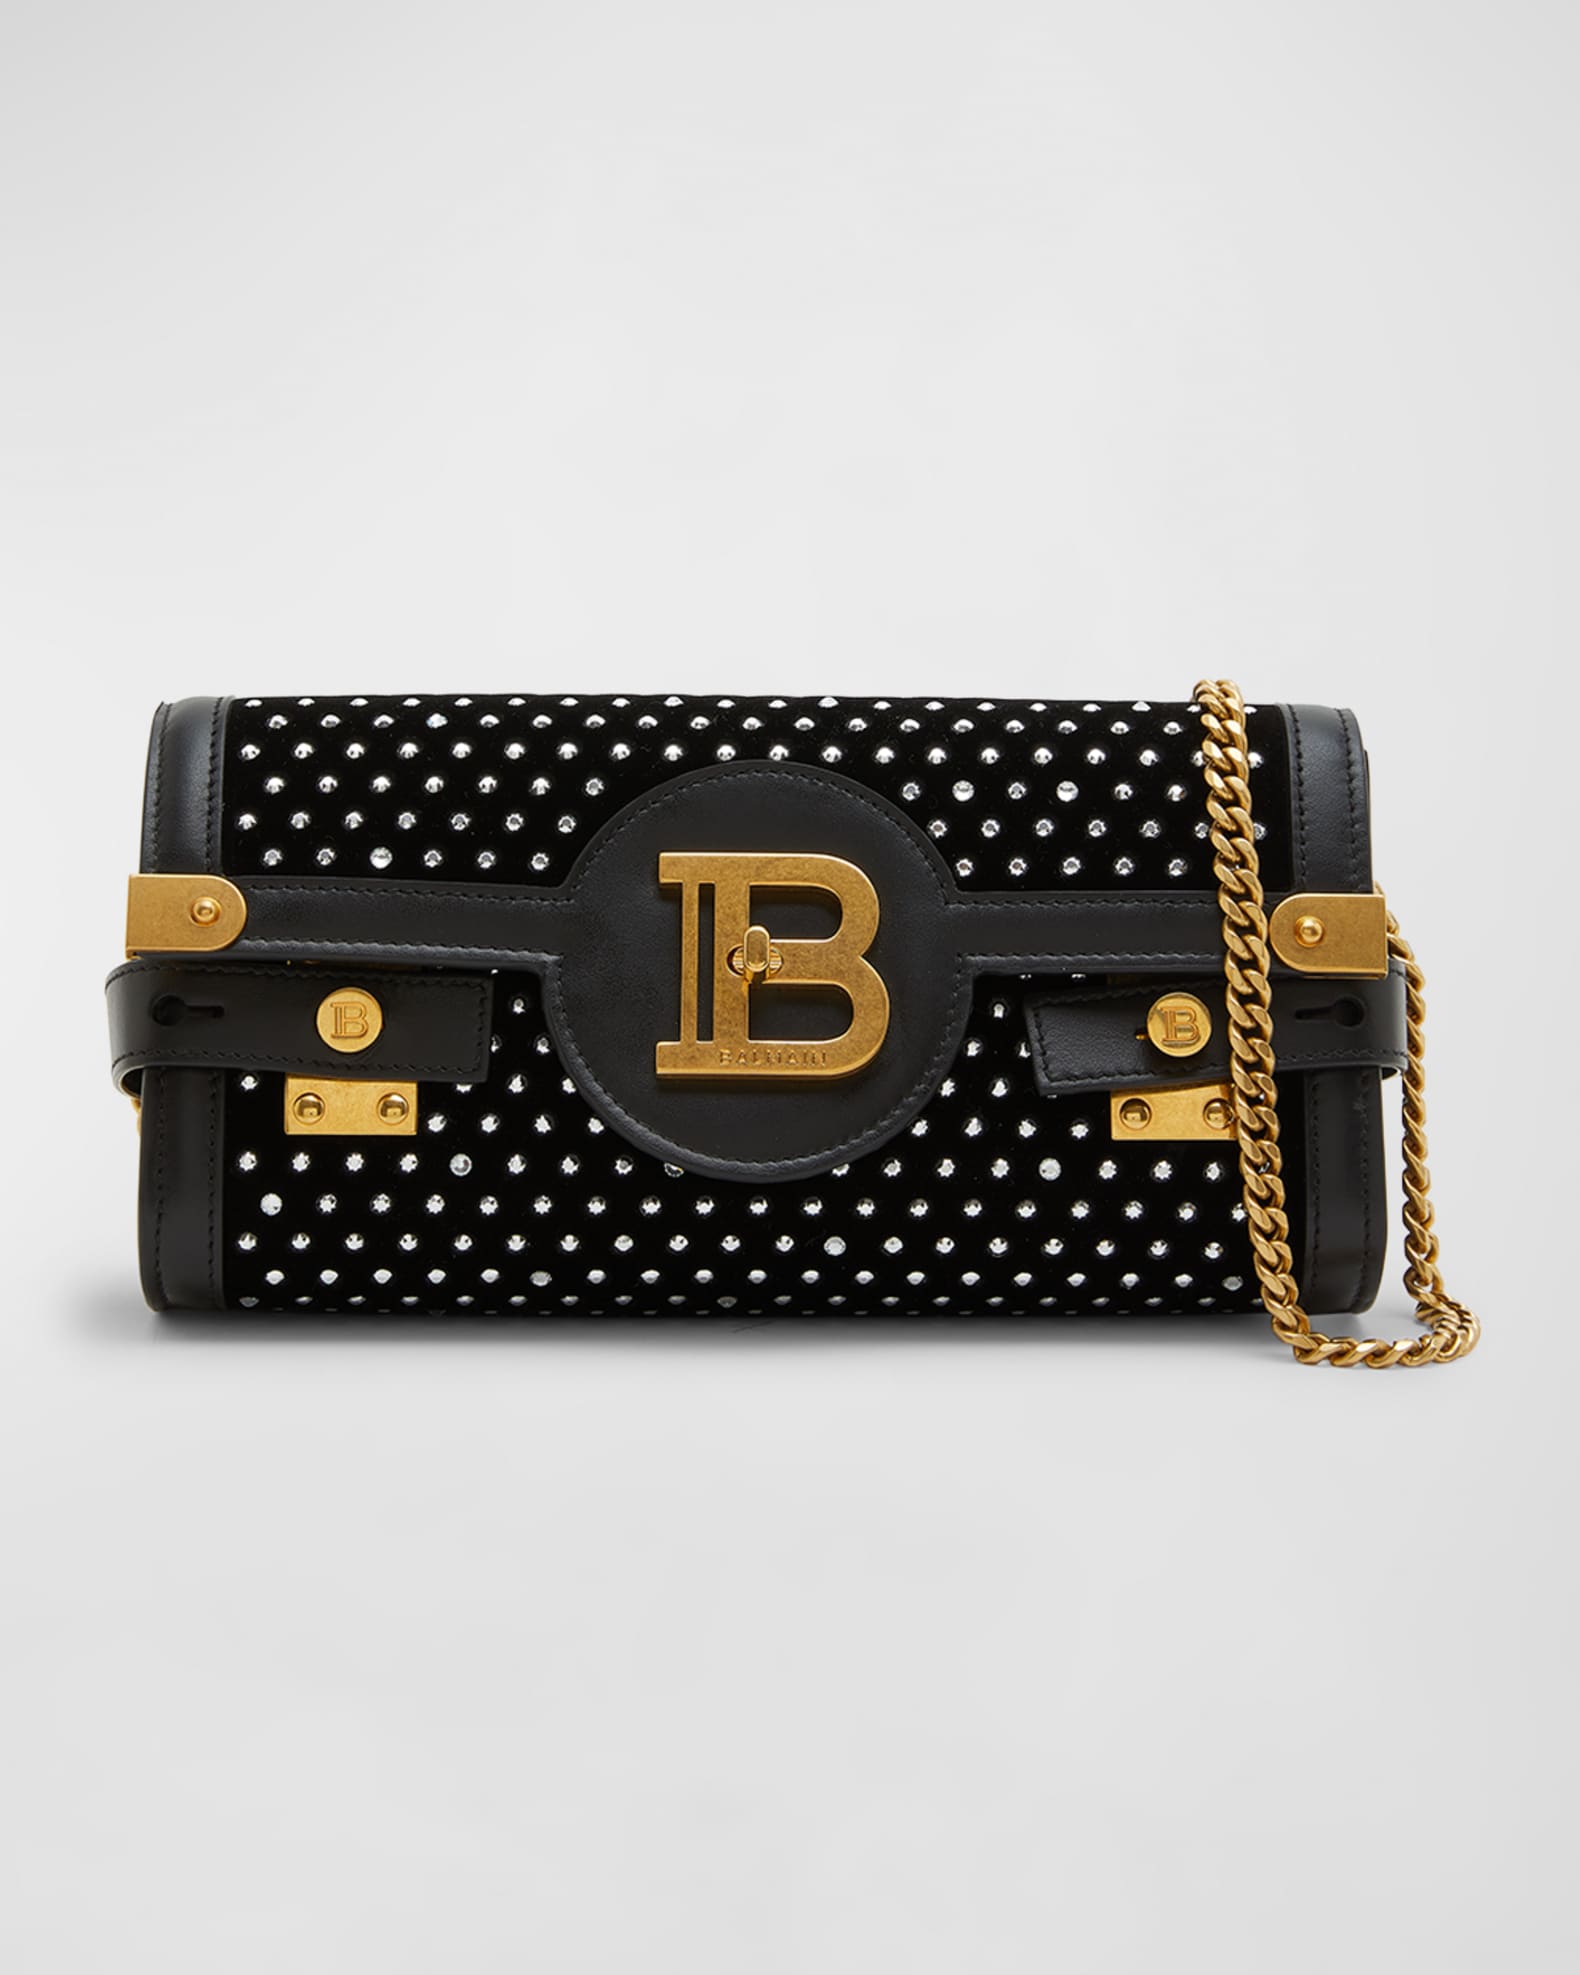 La Chic Designs Beaded Leopard and Bee Box Bag with Crossbody